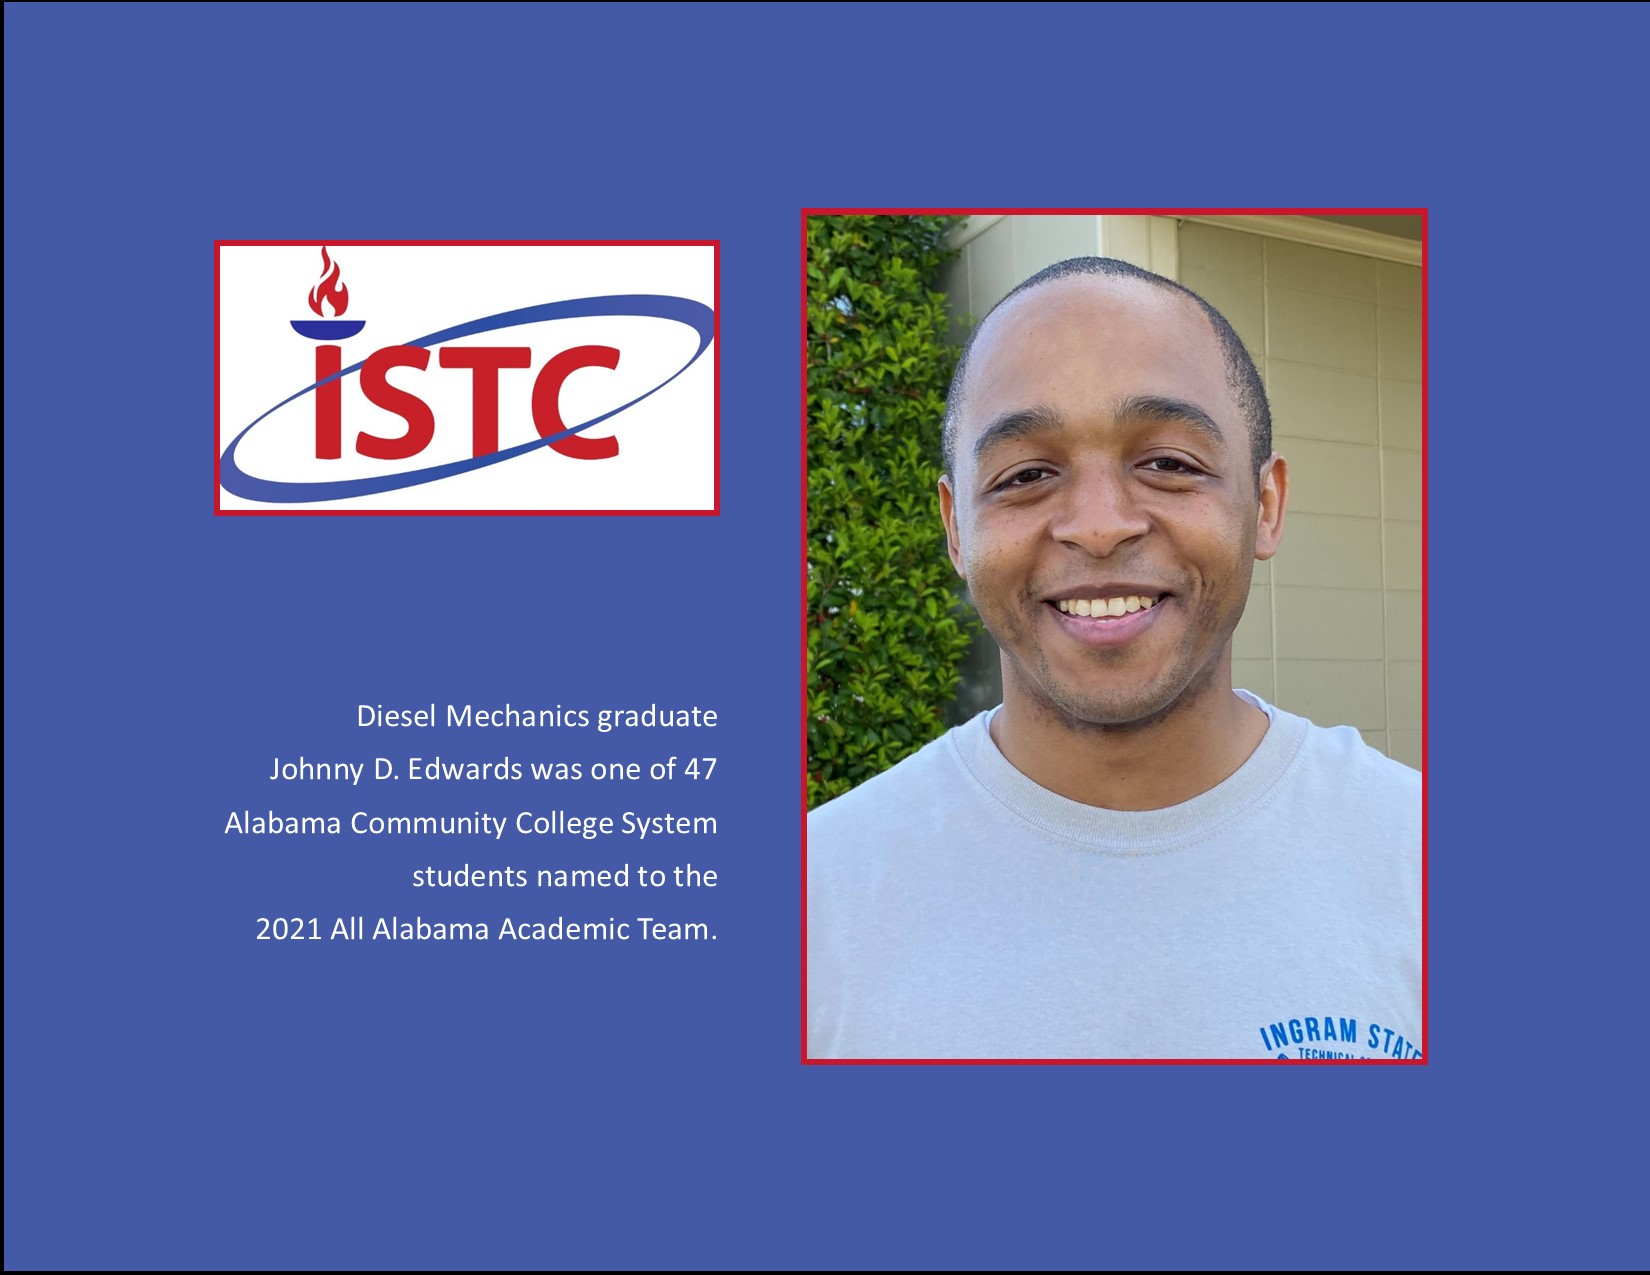 Featured image for “ISTC Graduate Johnny Edwards Named to All Alabama Academic Team”